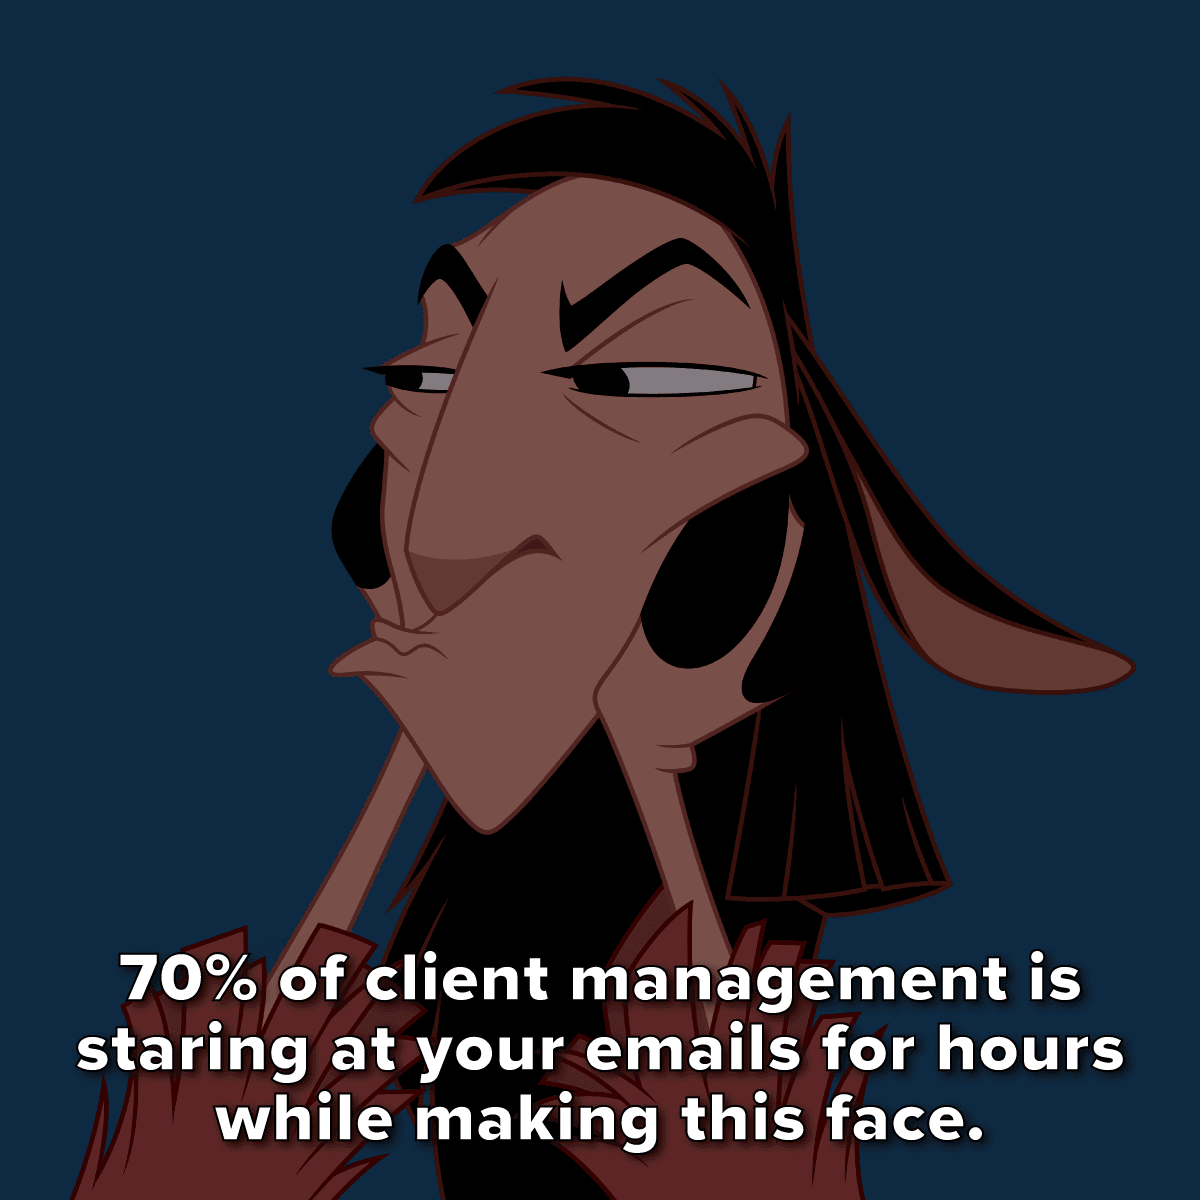 A marketing meme about client management at a marketing agency.